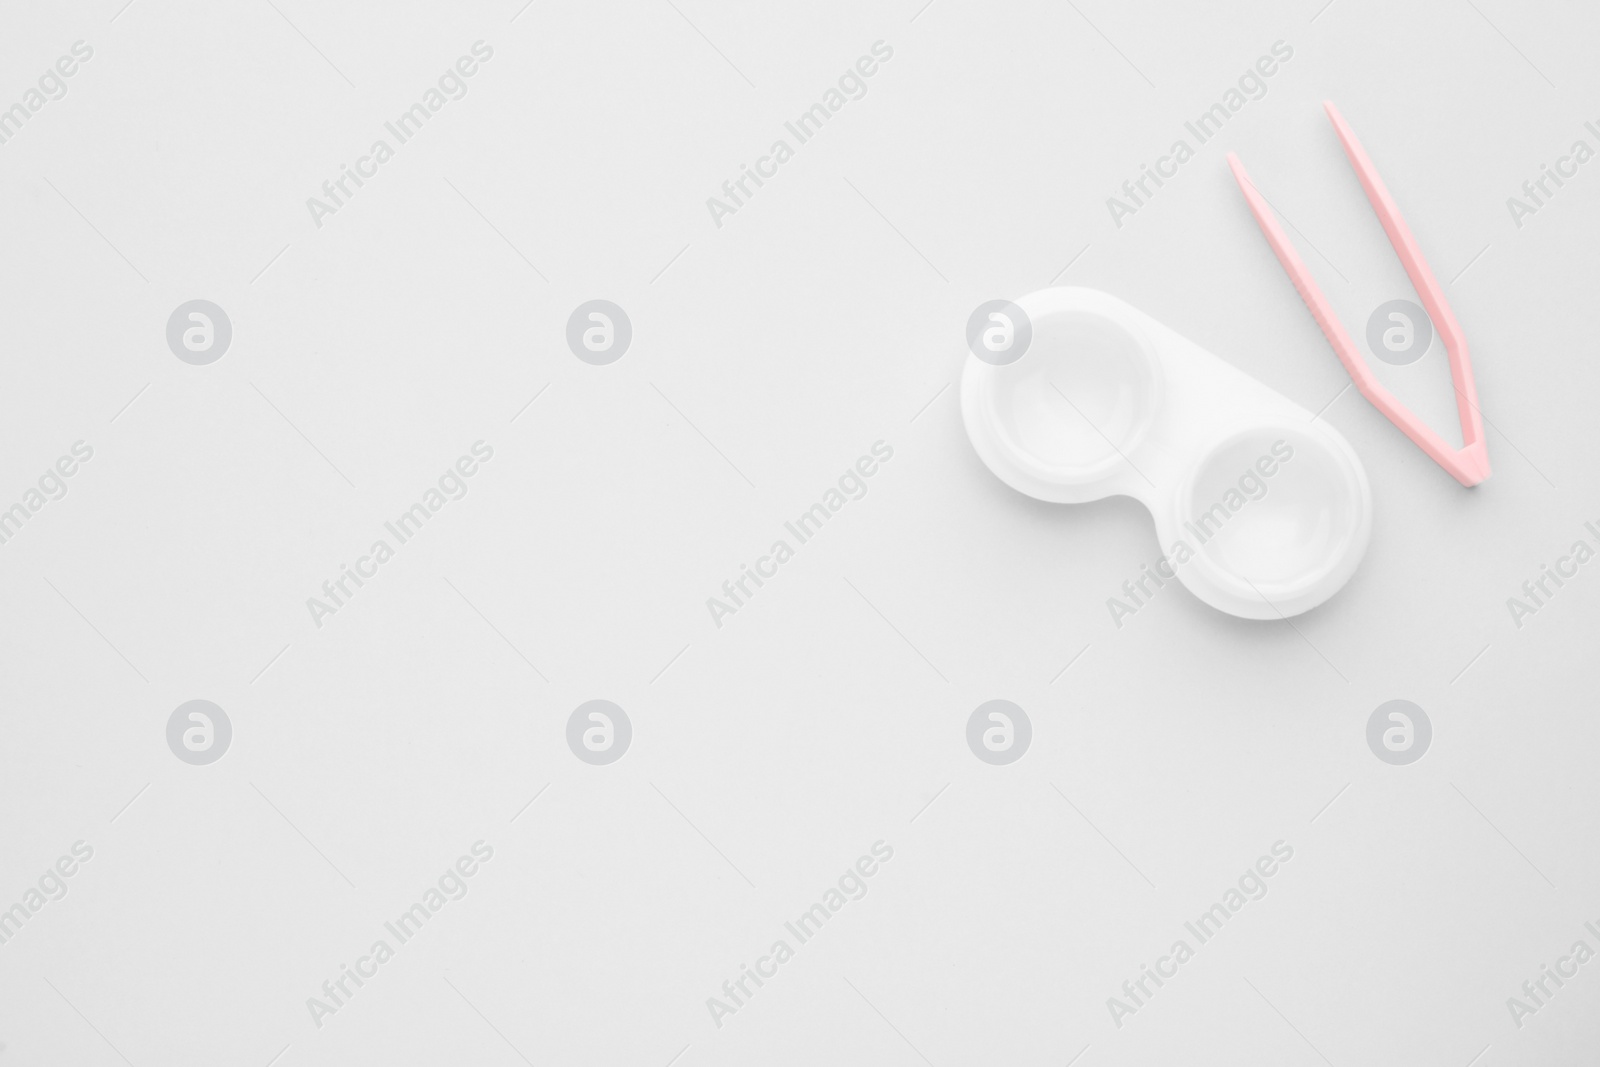 Photo of Case with contact lenses and tweezers on white background, flat lay. Space for text